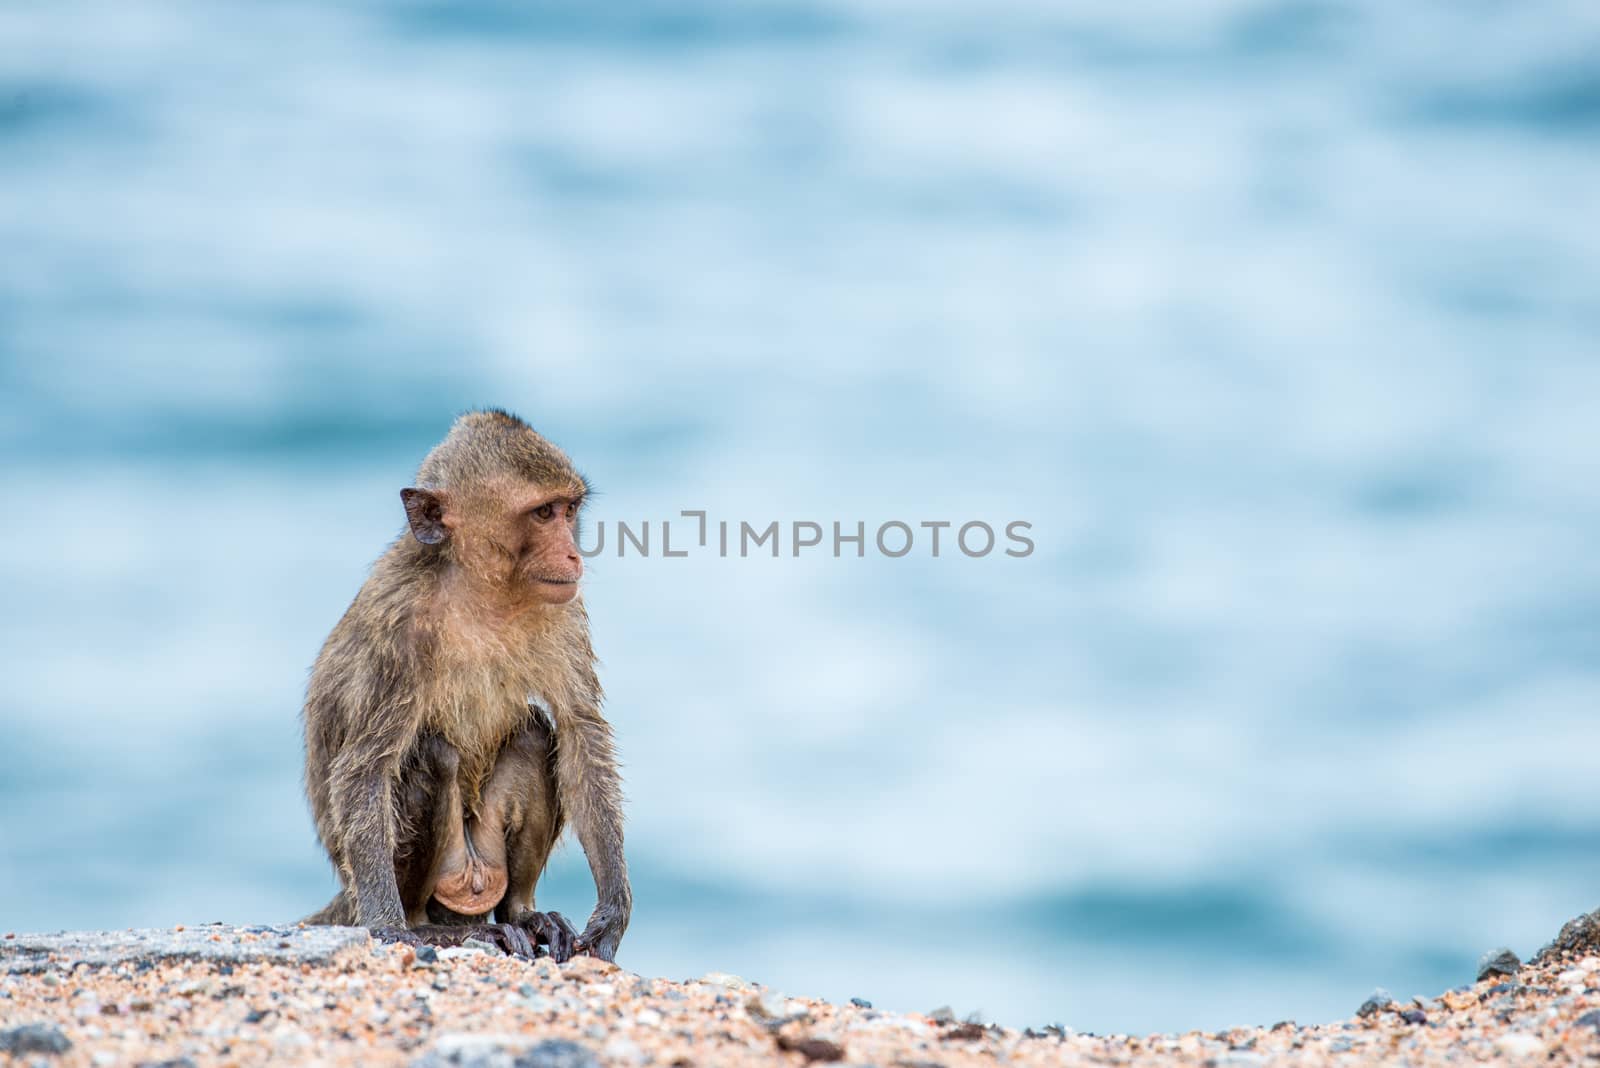 monkey sitting on the sand with sea background by antpkr